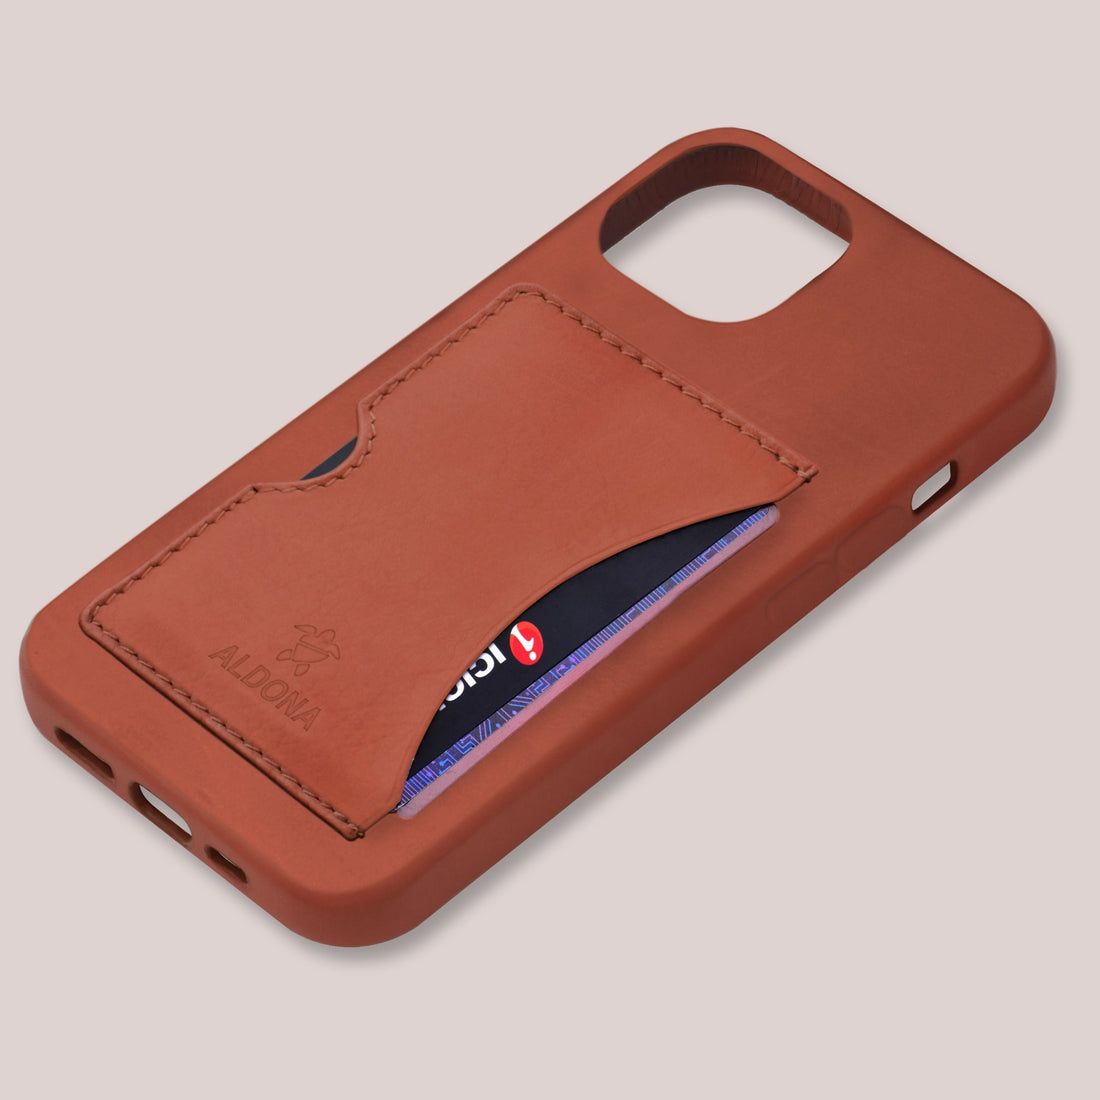 Baxter Card Case for iPhone 12 Pro Max - Dark Soil